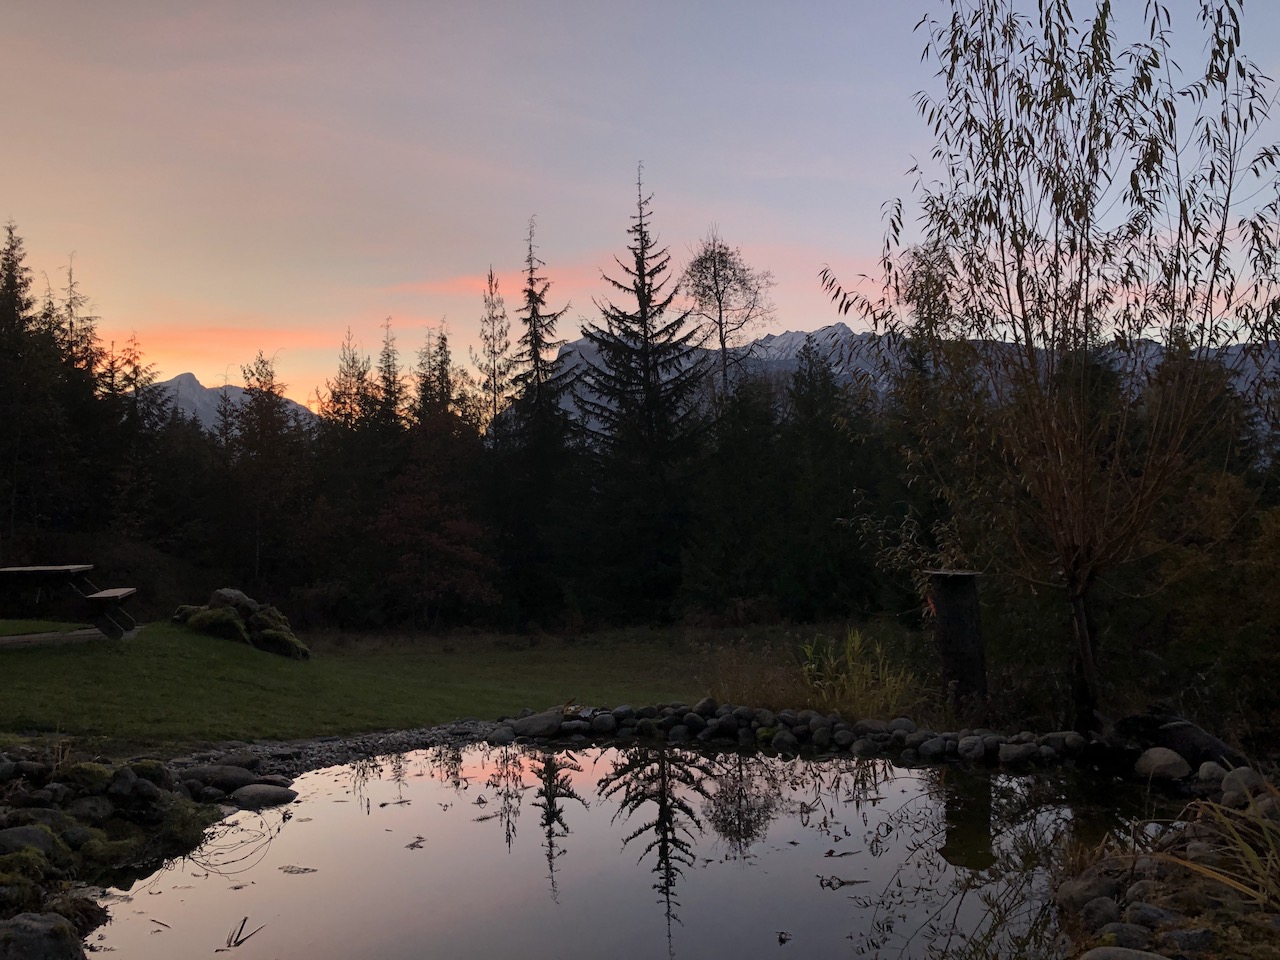 Mountain sunset with reflective pond in foreground